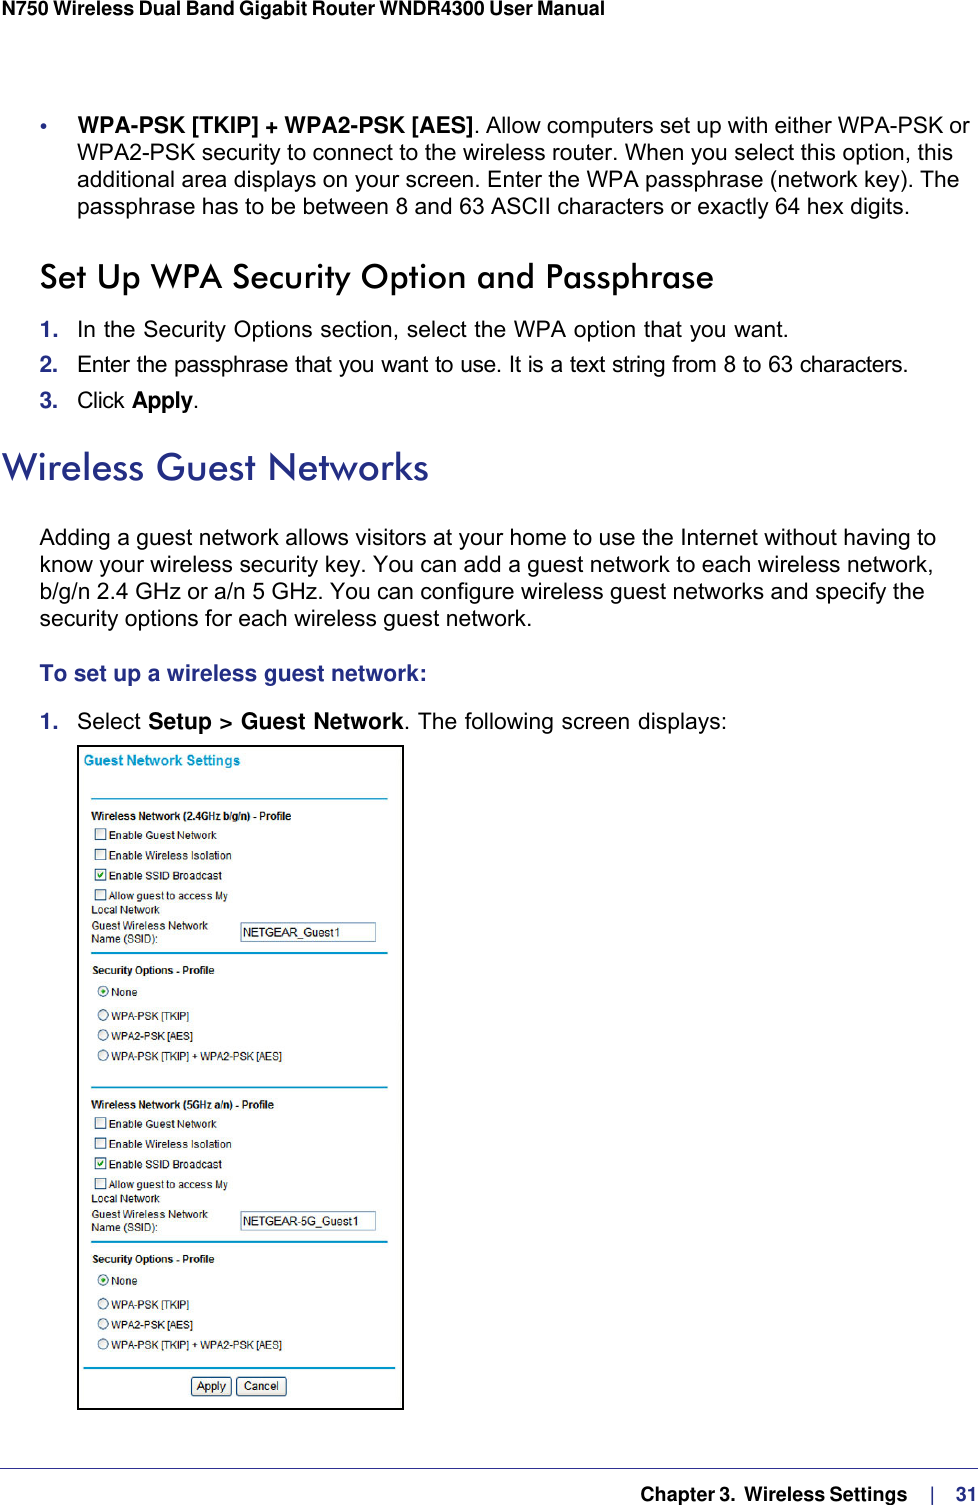   Chapter 3.  Wireless Settings     |    31N750 Wireless Dual Band Gigabit Router WNDR4300 User Manual •     WPA-PSK [TKIP] + WPA2-PSK [AES]. Allow computers set up with either WPA-PSK or WPA2-PSK security to connect to the wireless router. When you select this option, this additional area displays on your screen. Enter the WPA passphrase (network key). The passphrase has to be between 8 and 63 ASCII characters or exactly 64 hex digits.Set Up WPA Security Option and Passphrase1.  In the Security Options section, select the WPA option that you want.2.  Enter the passphrase that you want to use. It is a text string from 8 to 63 characters.3.  Click Apply.Wireless Guest NetworksAdding a guest network allows visitors at your home to use the Internet without having to know your wireless security key. You can add a guest network to each wireless network, b/g/n 2.4 GHz or a/n 5 GHz. You can configure wireless guest networks and specify the security options for each wireless guest network. To set up a wireless guest network:1.  Select Setup &gt; Guest Network. The following screen displays: